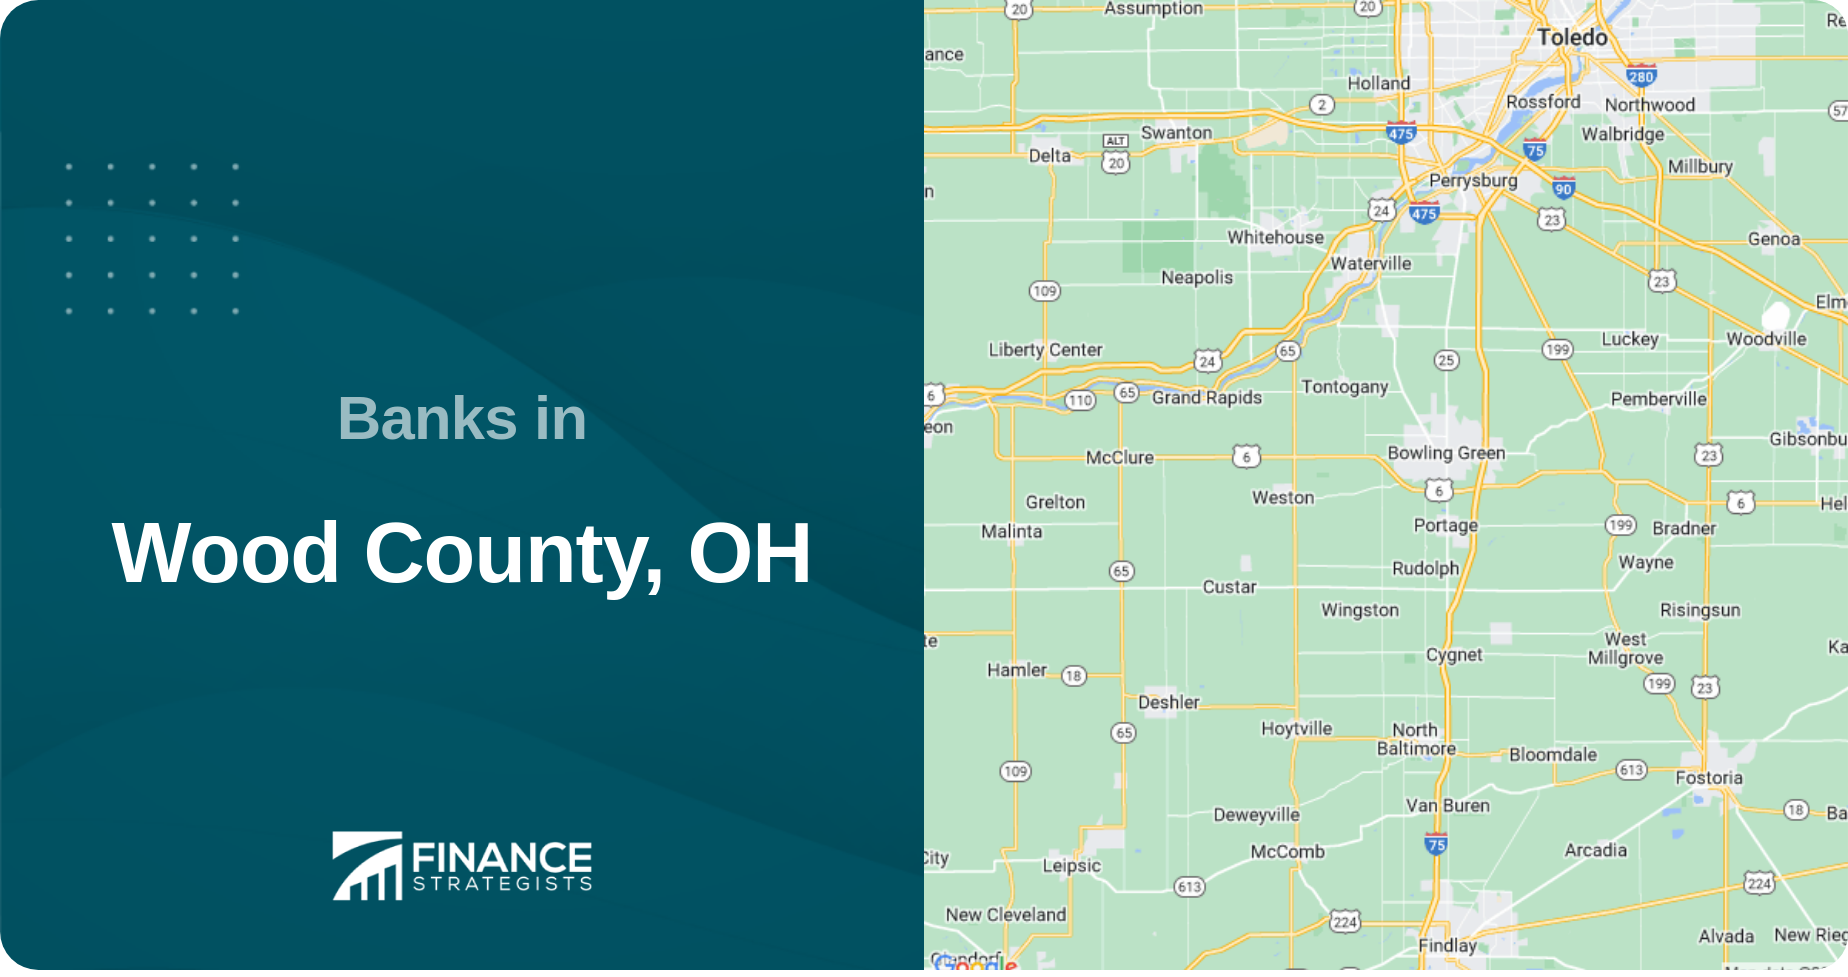 Banks in Wood County, OH